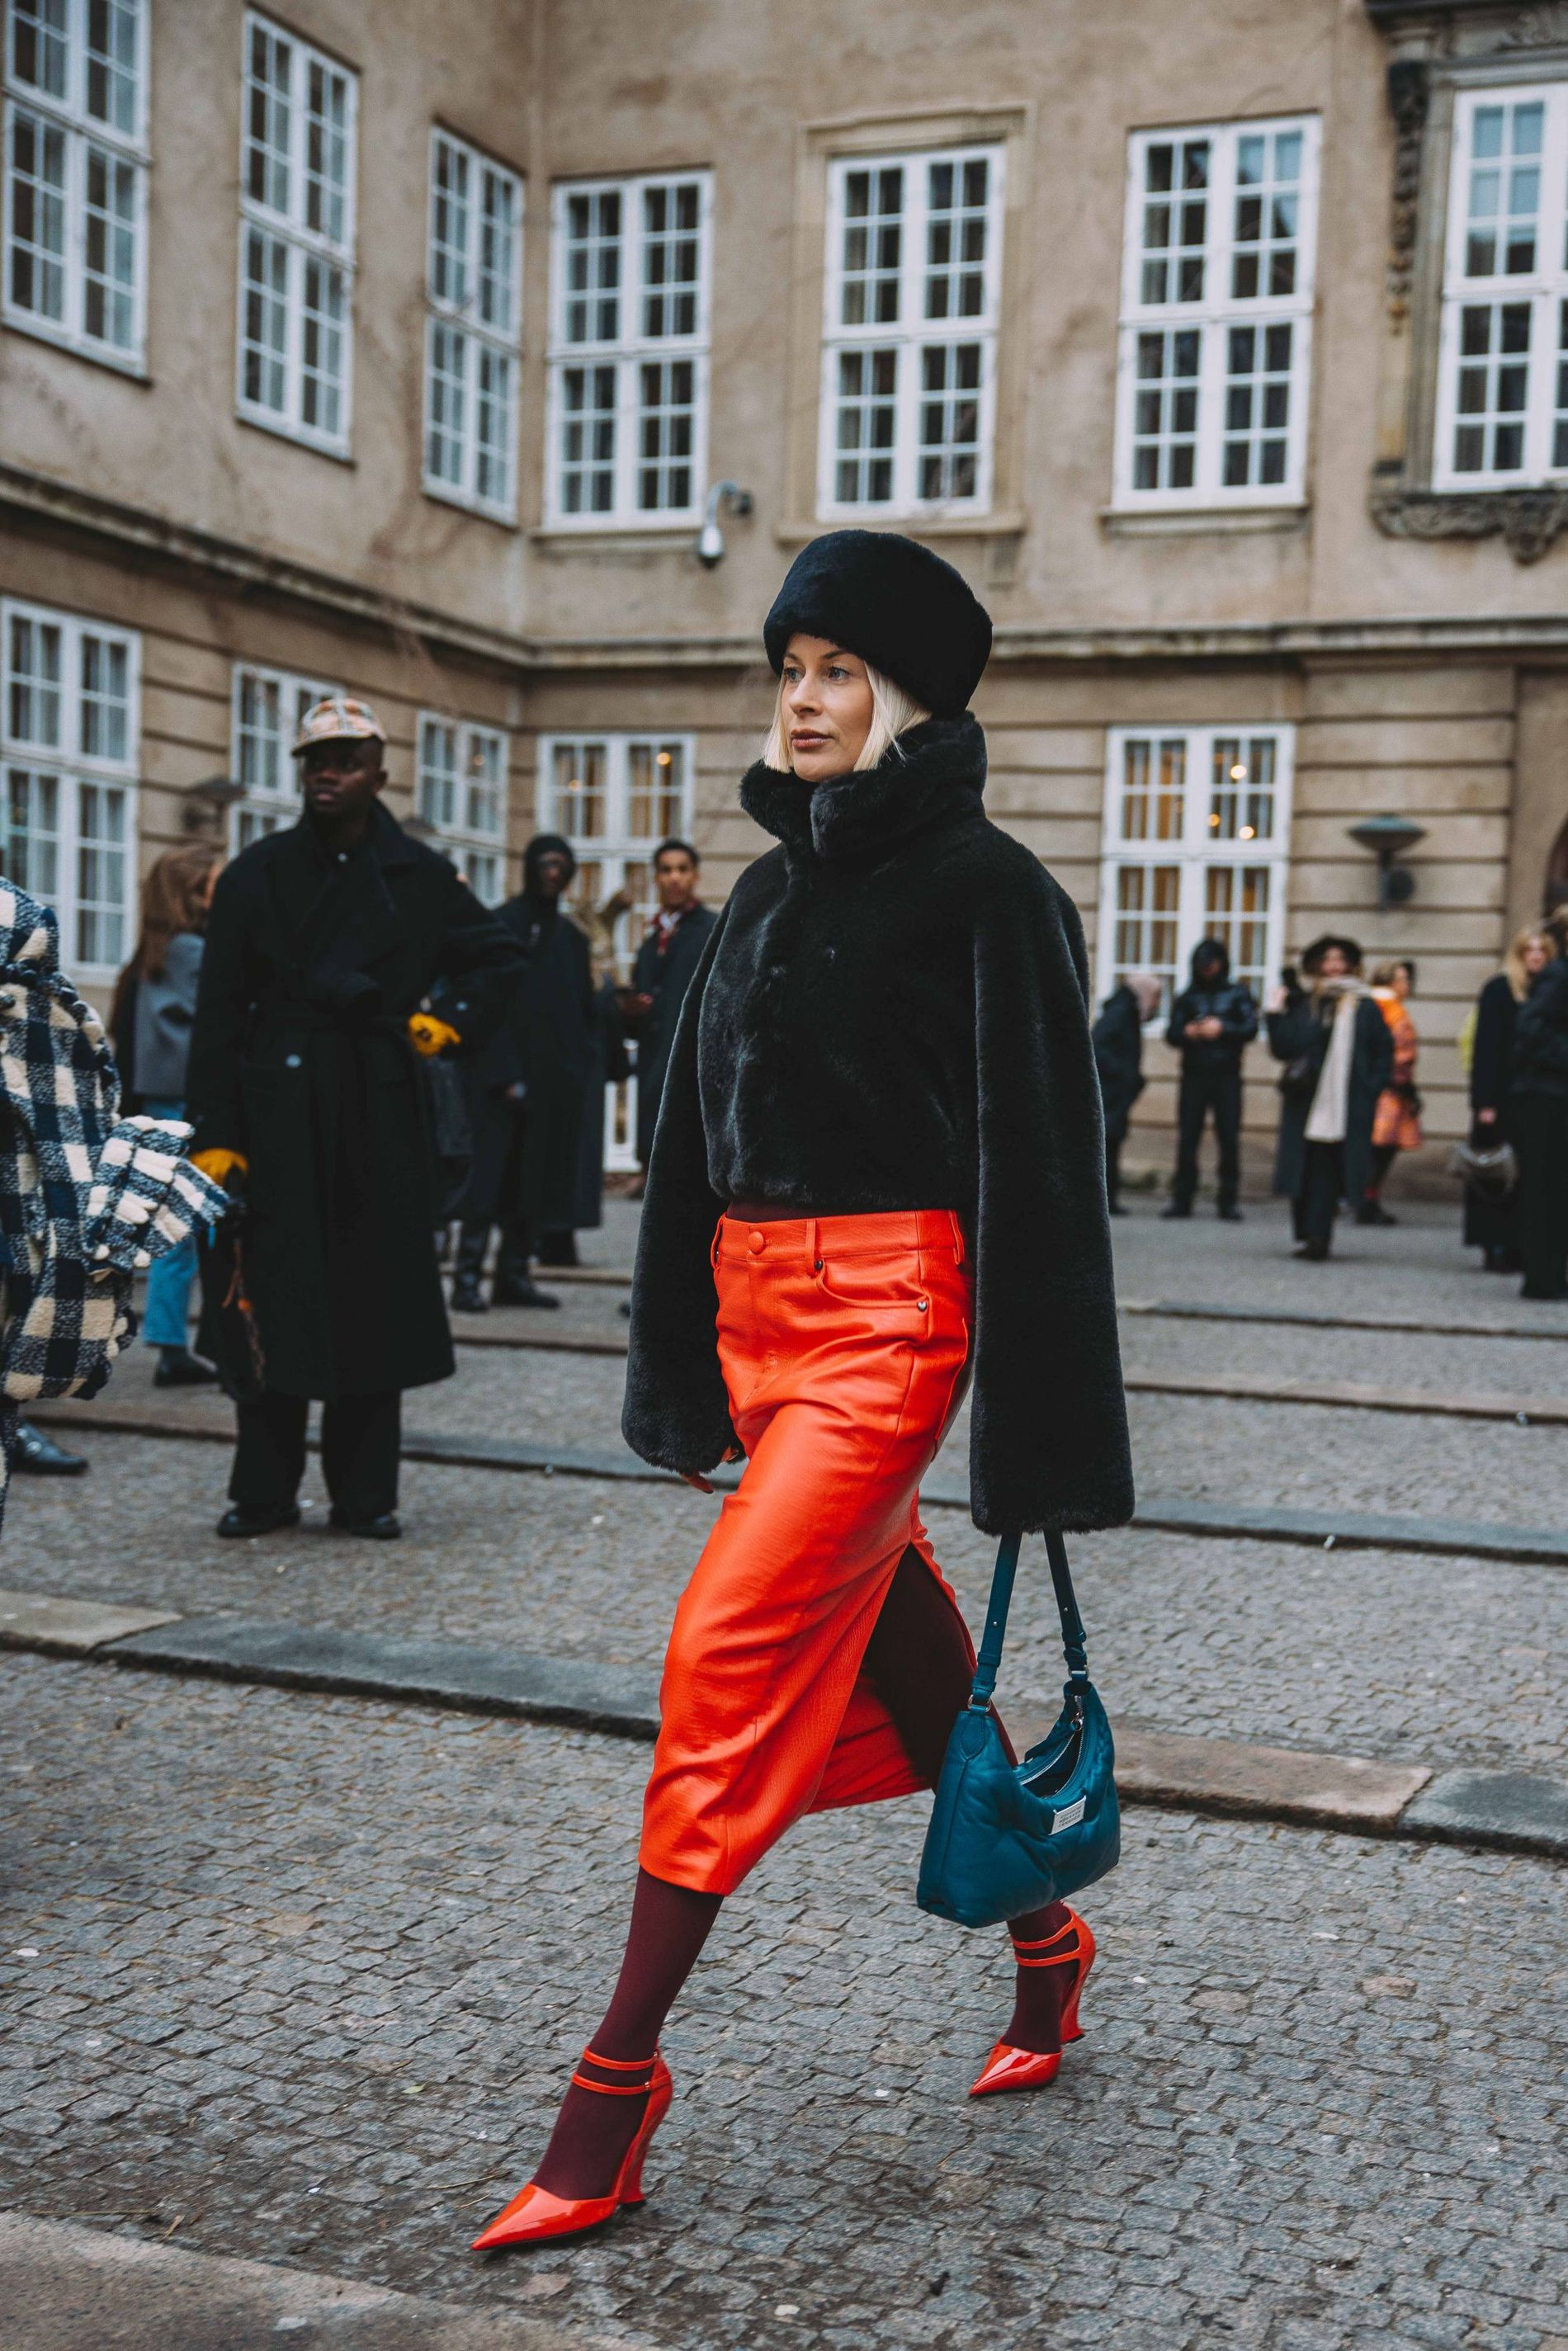 A guest at CPHFW poses for a street style image wearing a red skirt, burgundy stockings and red heels